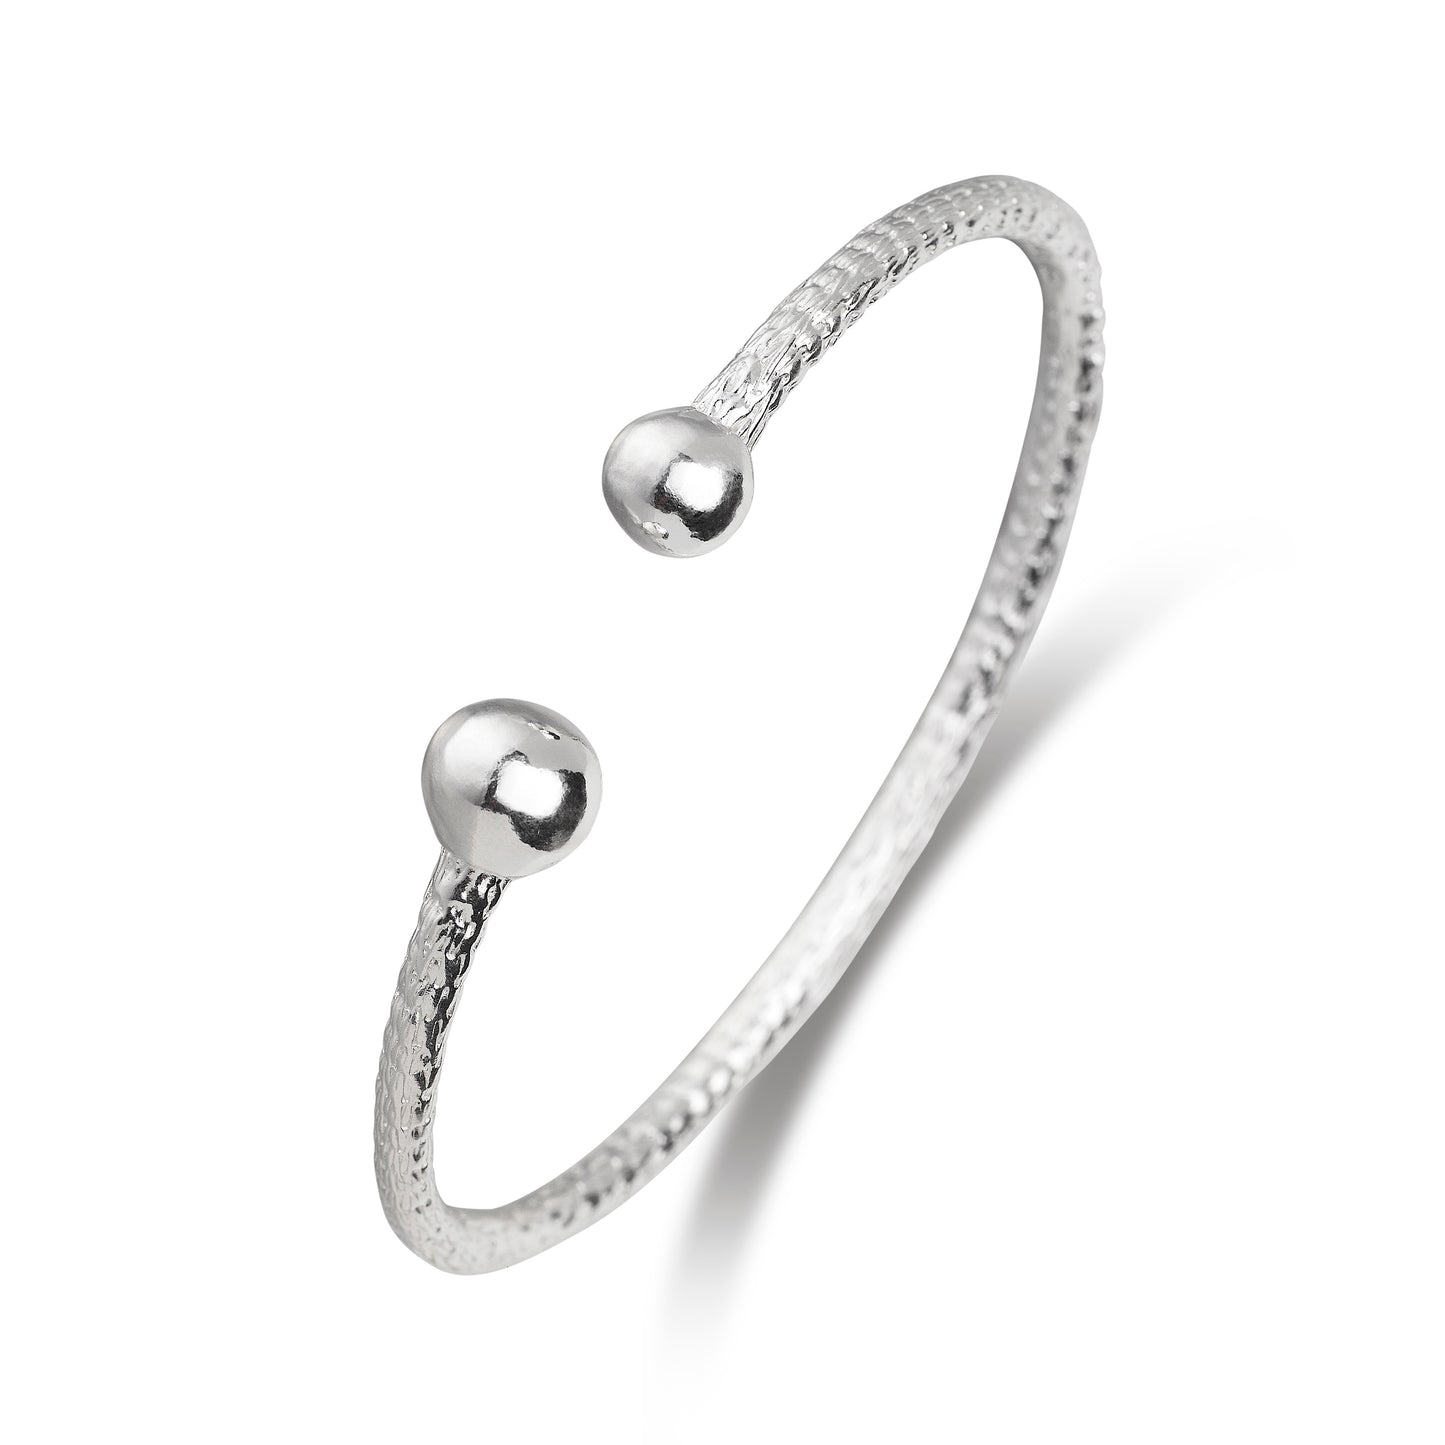 Better Jewelry .925 Sterling Silver Asymmetric Balls Bangles, 1 pair